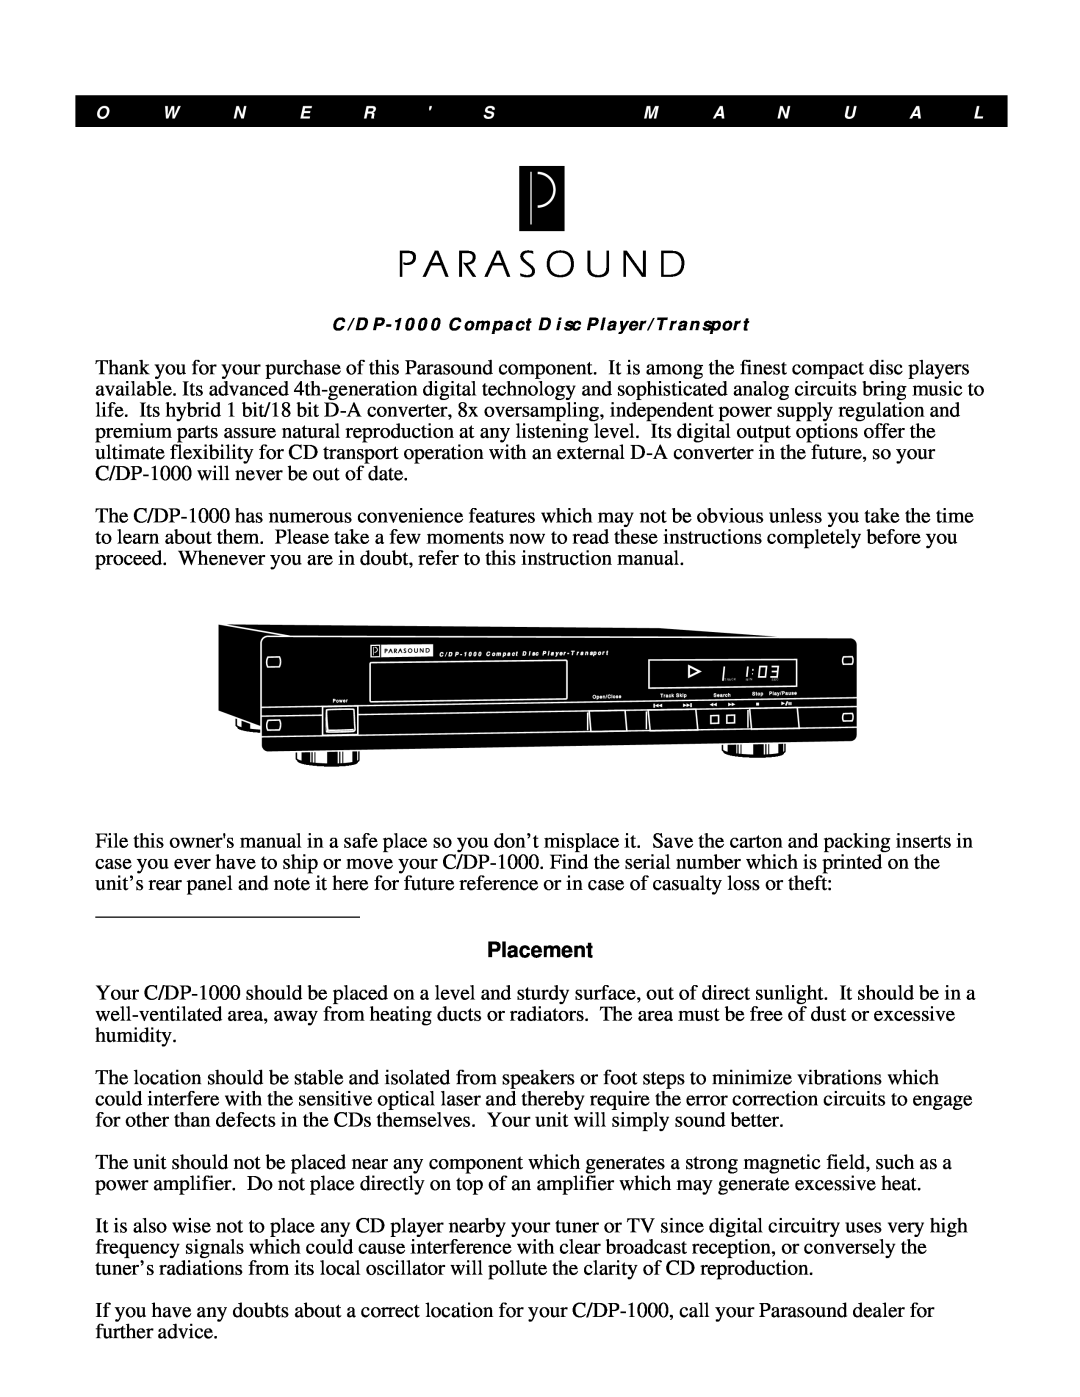 Parasound owner manual Placement, O W N E R S, M A N U A L, C/DP-1000Compact Disc Player/Transport 